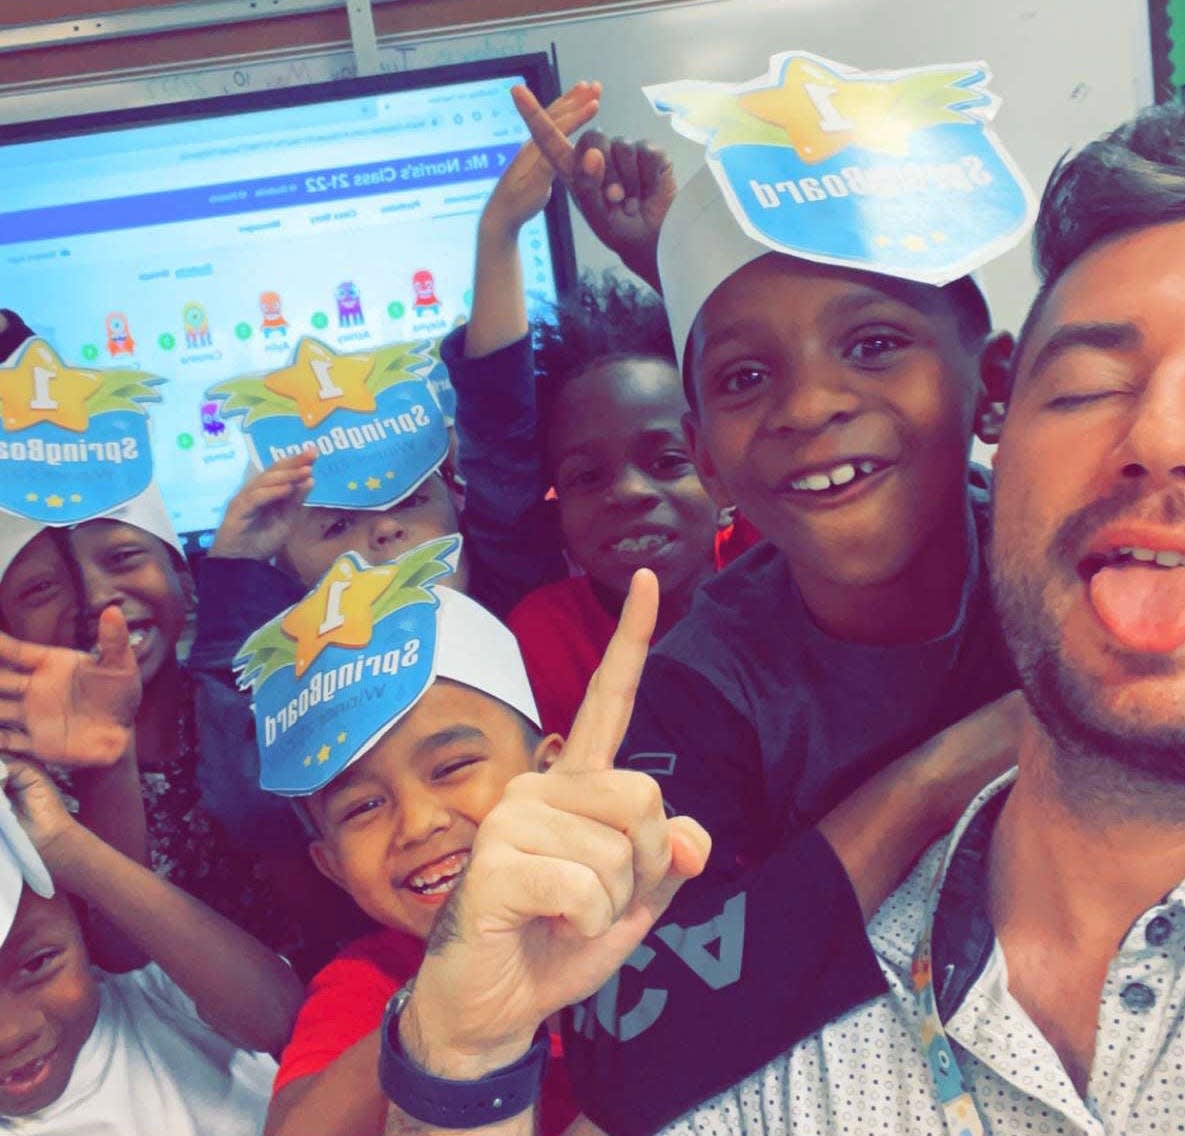 Matthew Norris's first grade class at Sunset Park Elementary earned first place in the SpringBoard Math Challenge against 20,000 classes across the country.